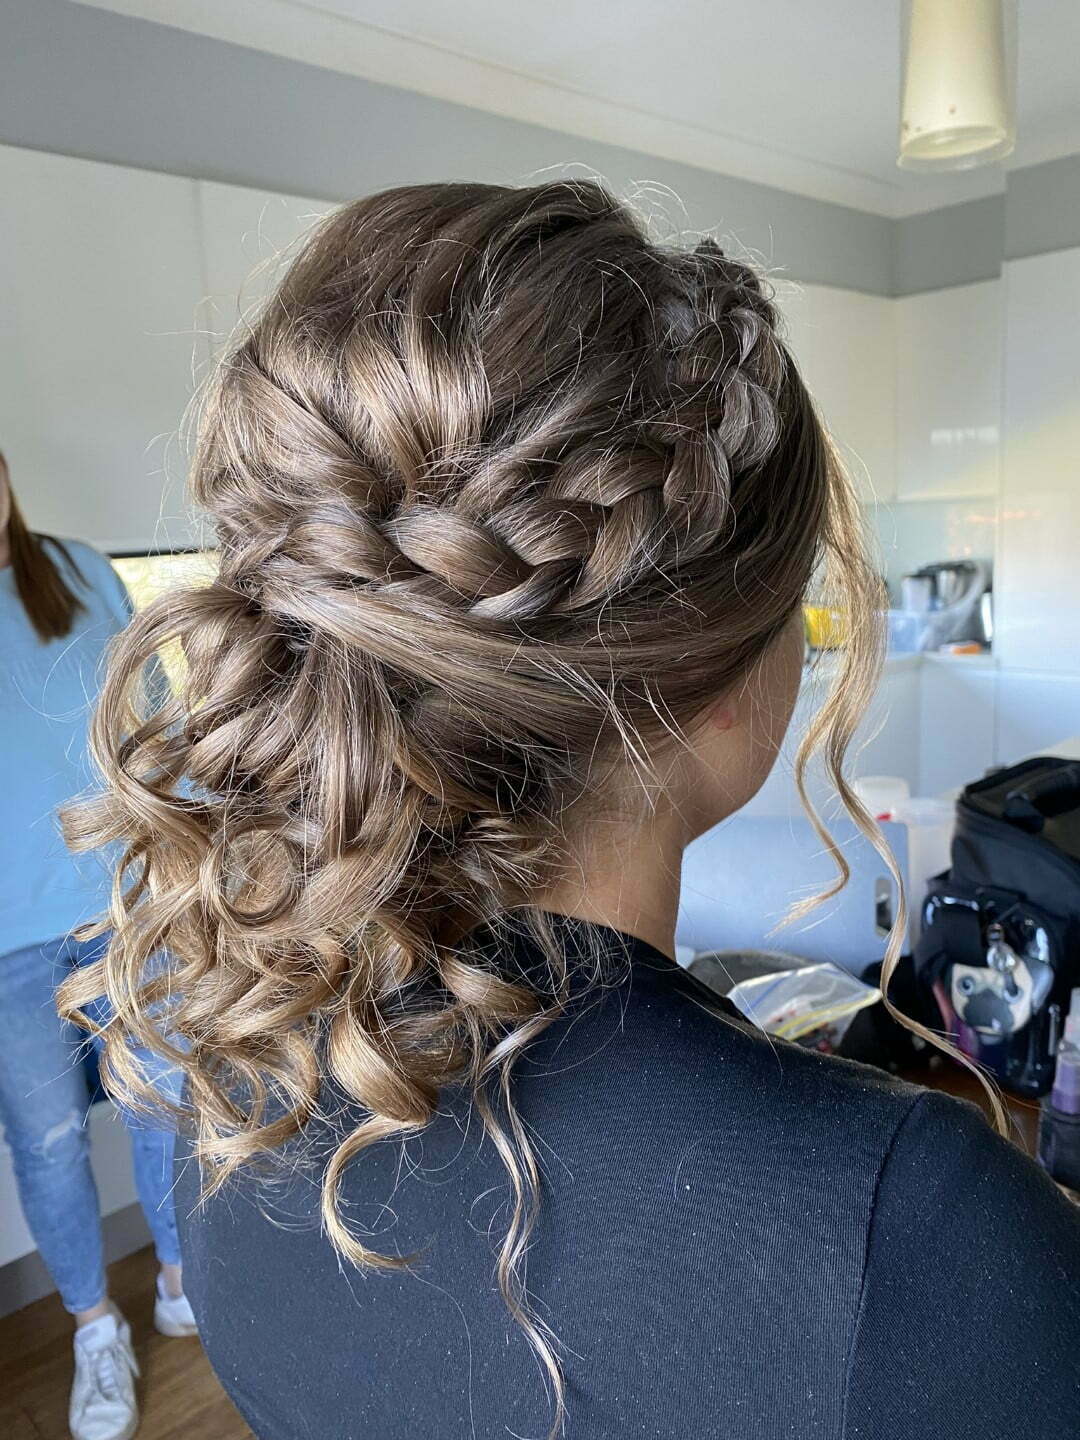 Tips for Choosing Your Wedding Hair and Bridal Makeup